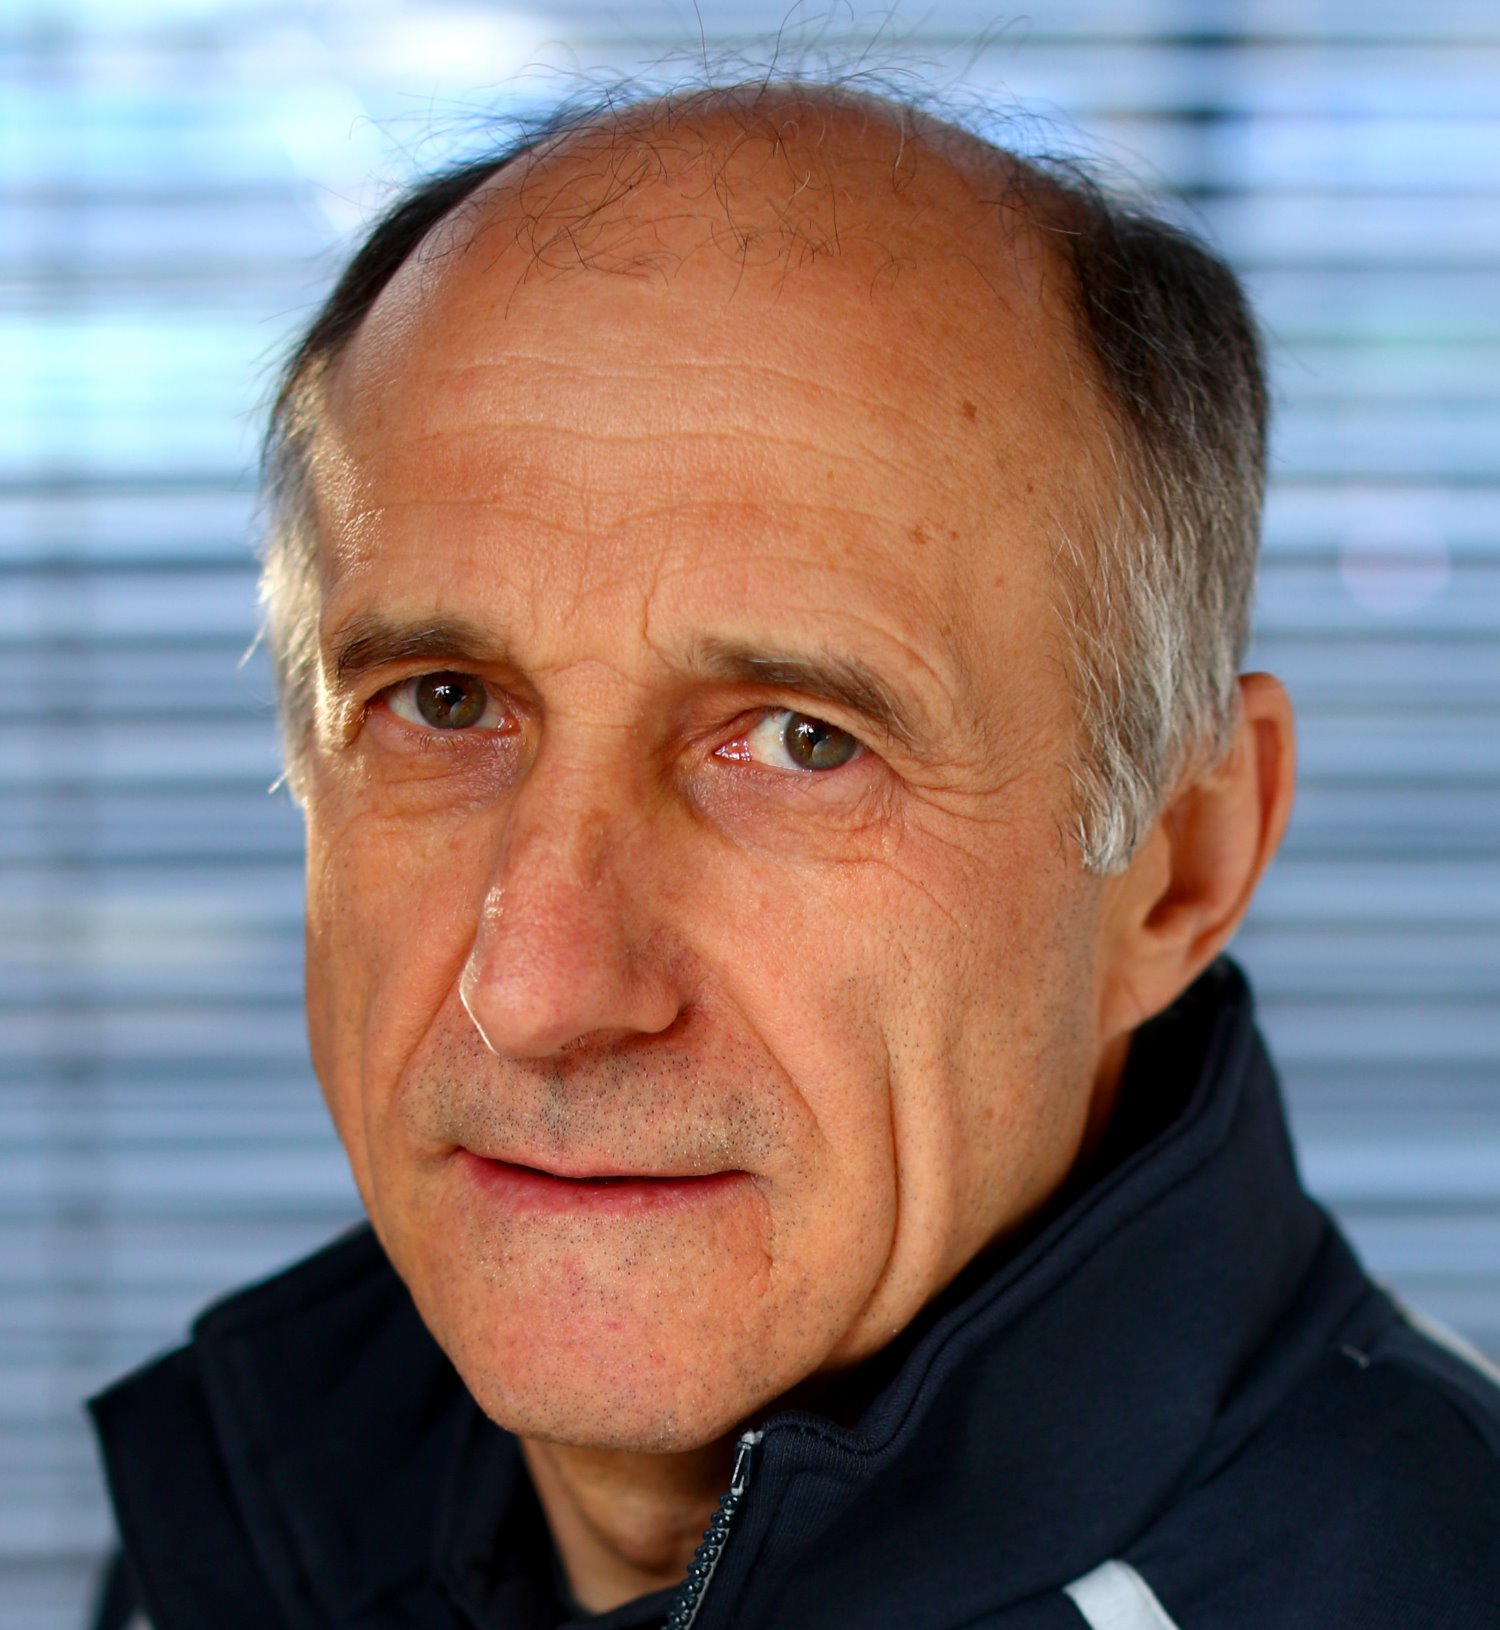 Franz Tost knows his place